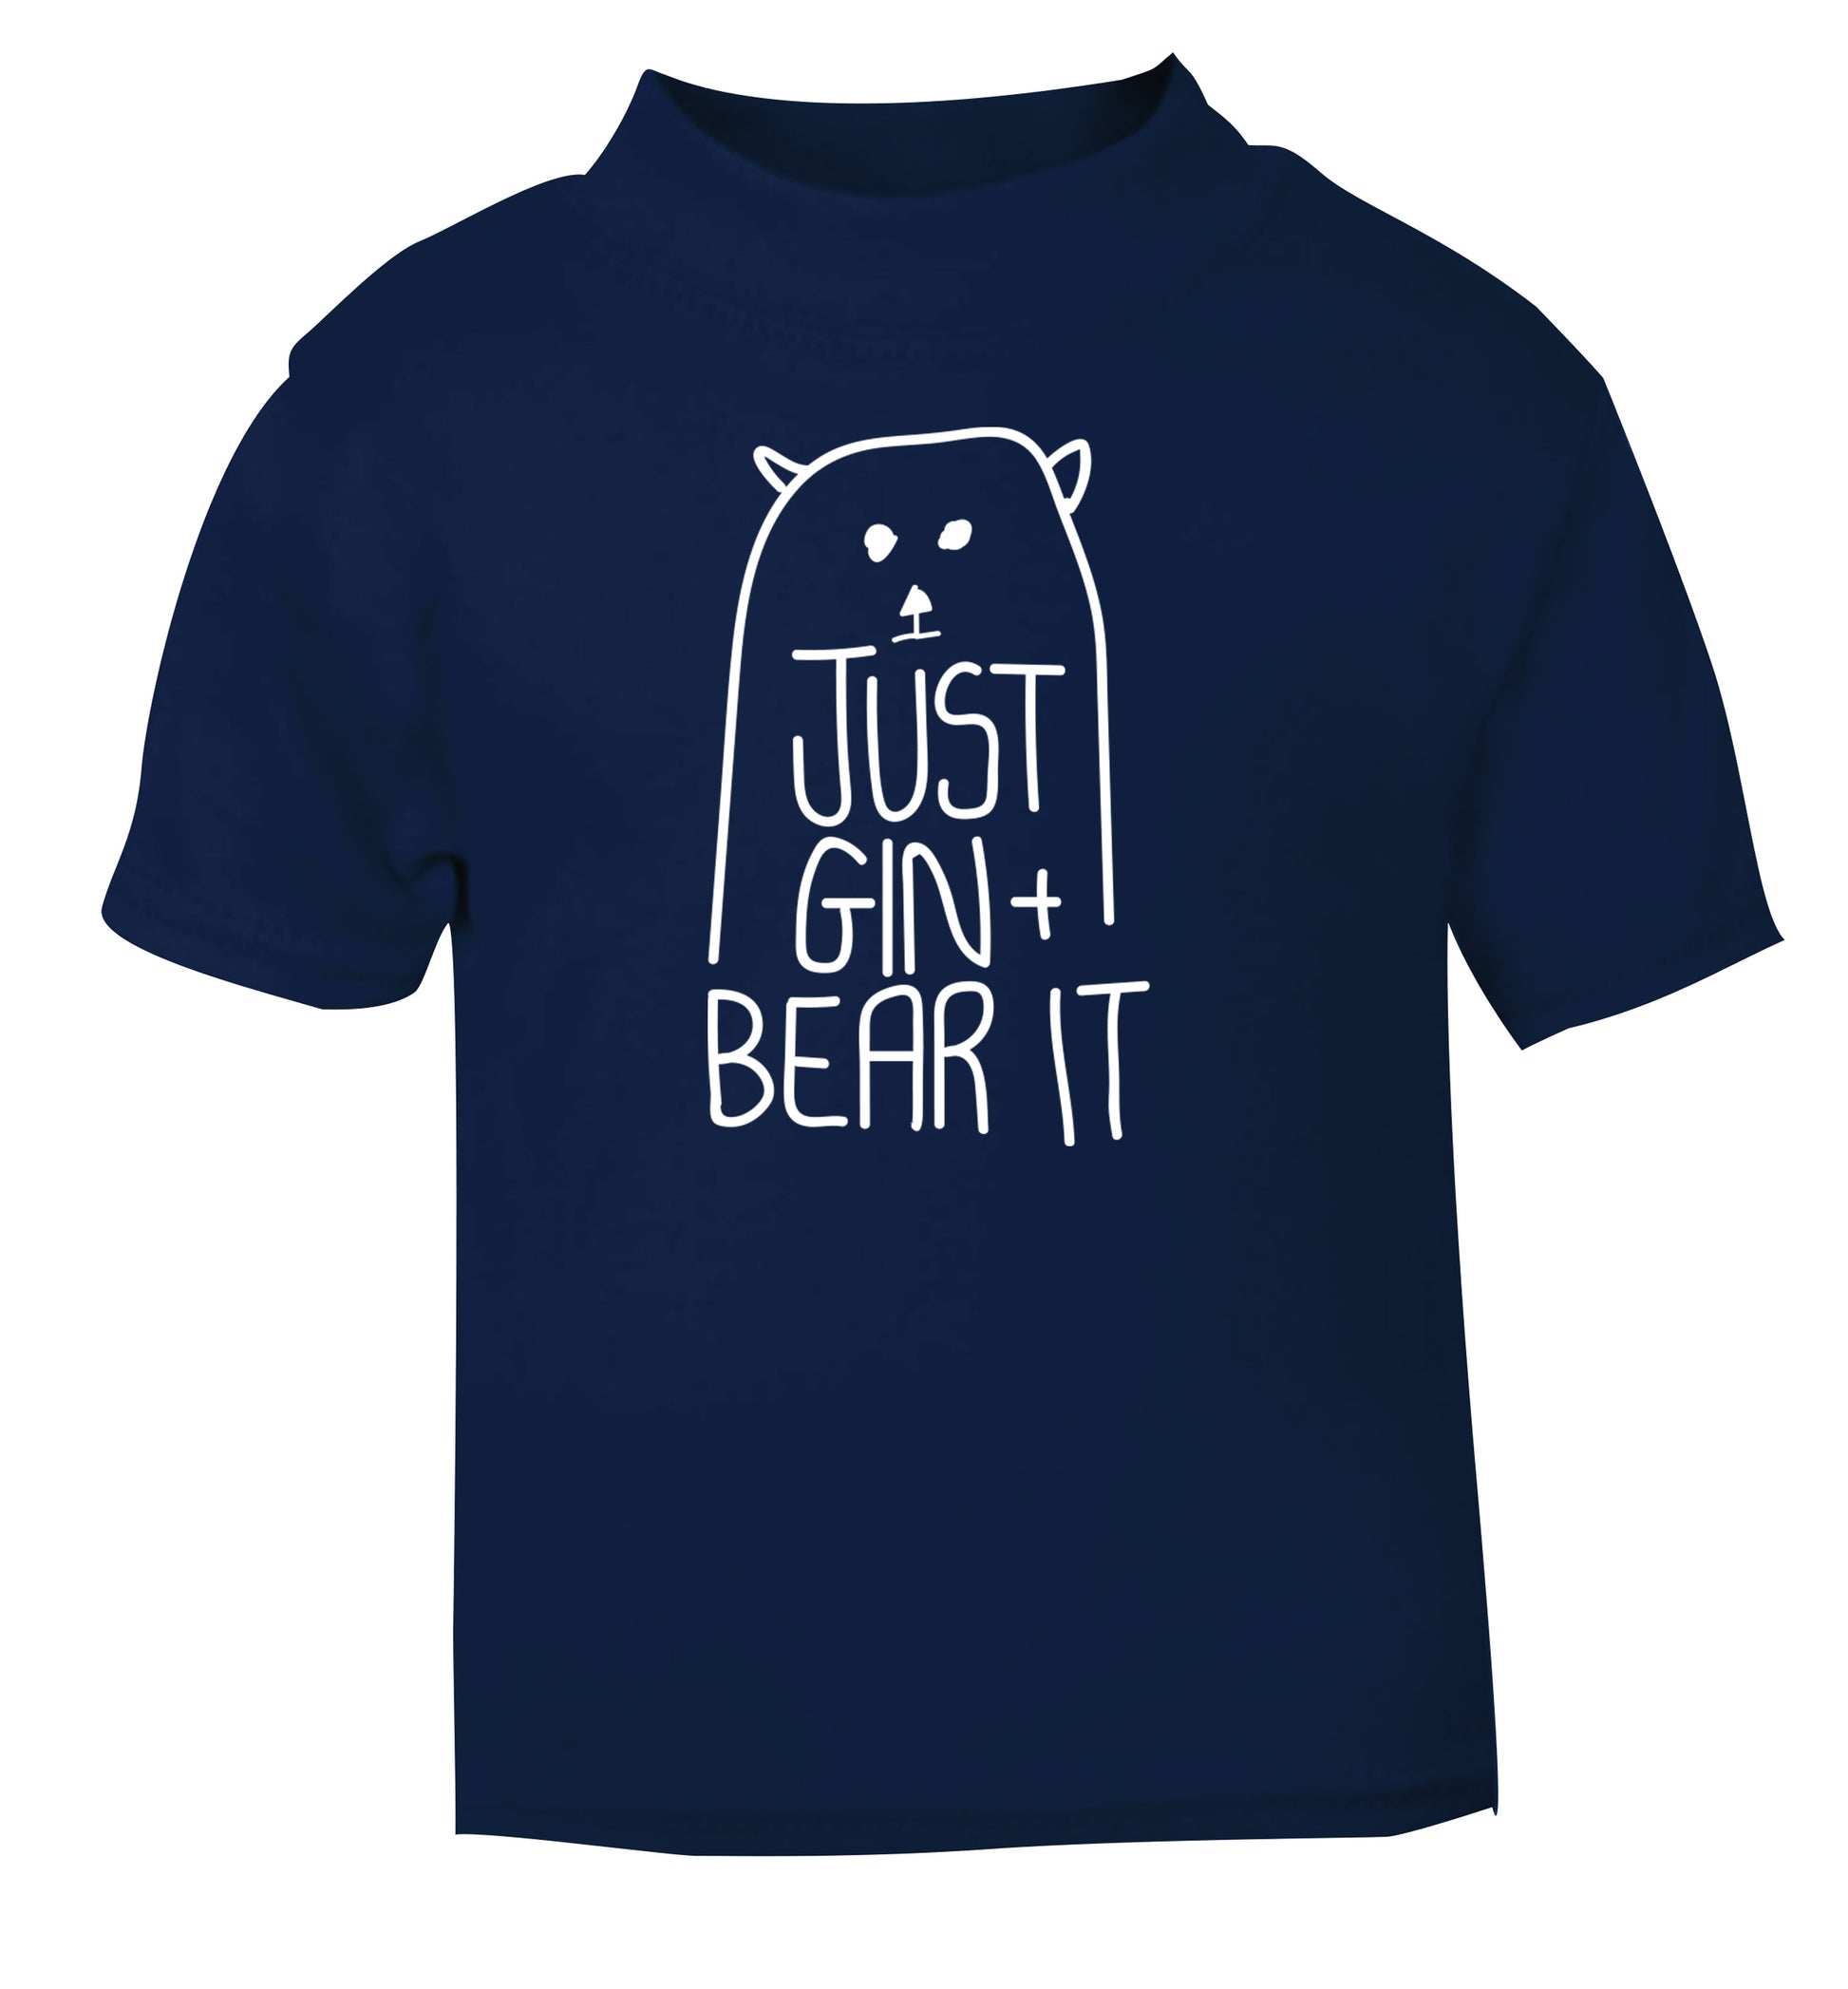 Just gin and bear it navy Baby Toddler Tshirt 2 Years